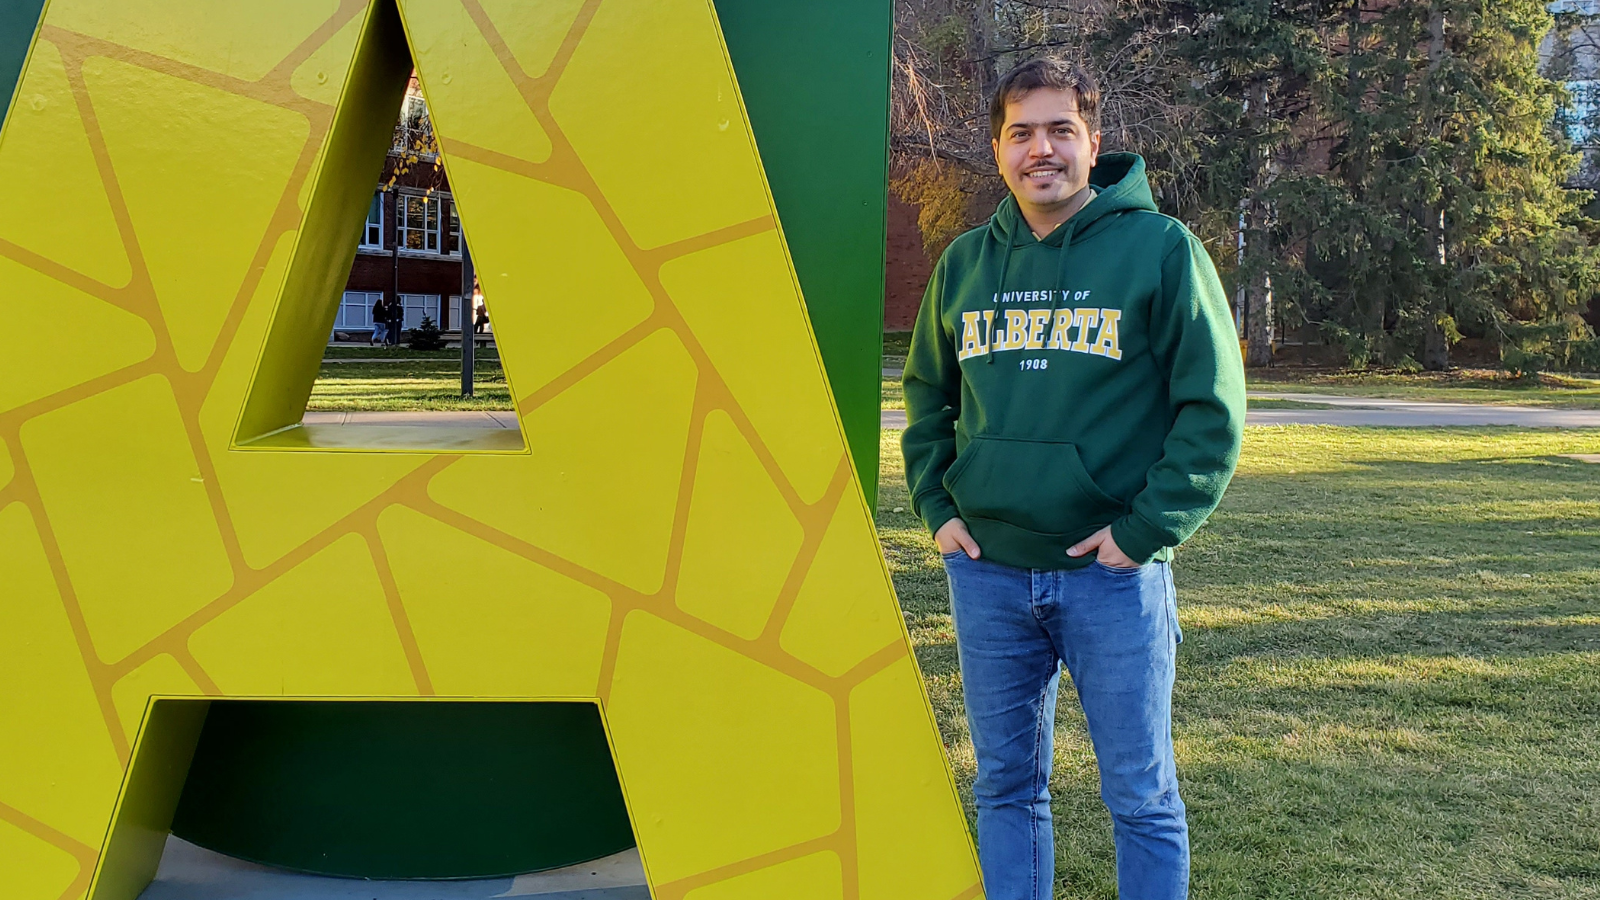 Portrait photo of student in beside UofA 'logo' on the Quad.